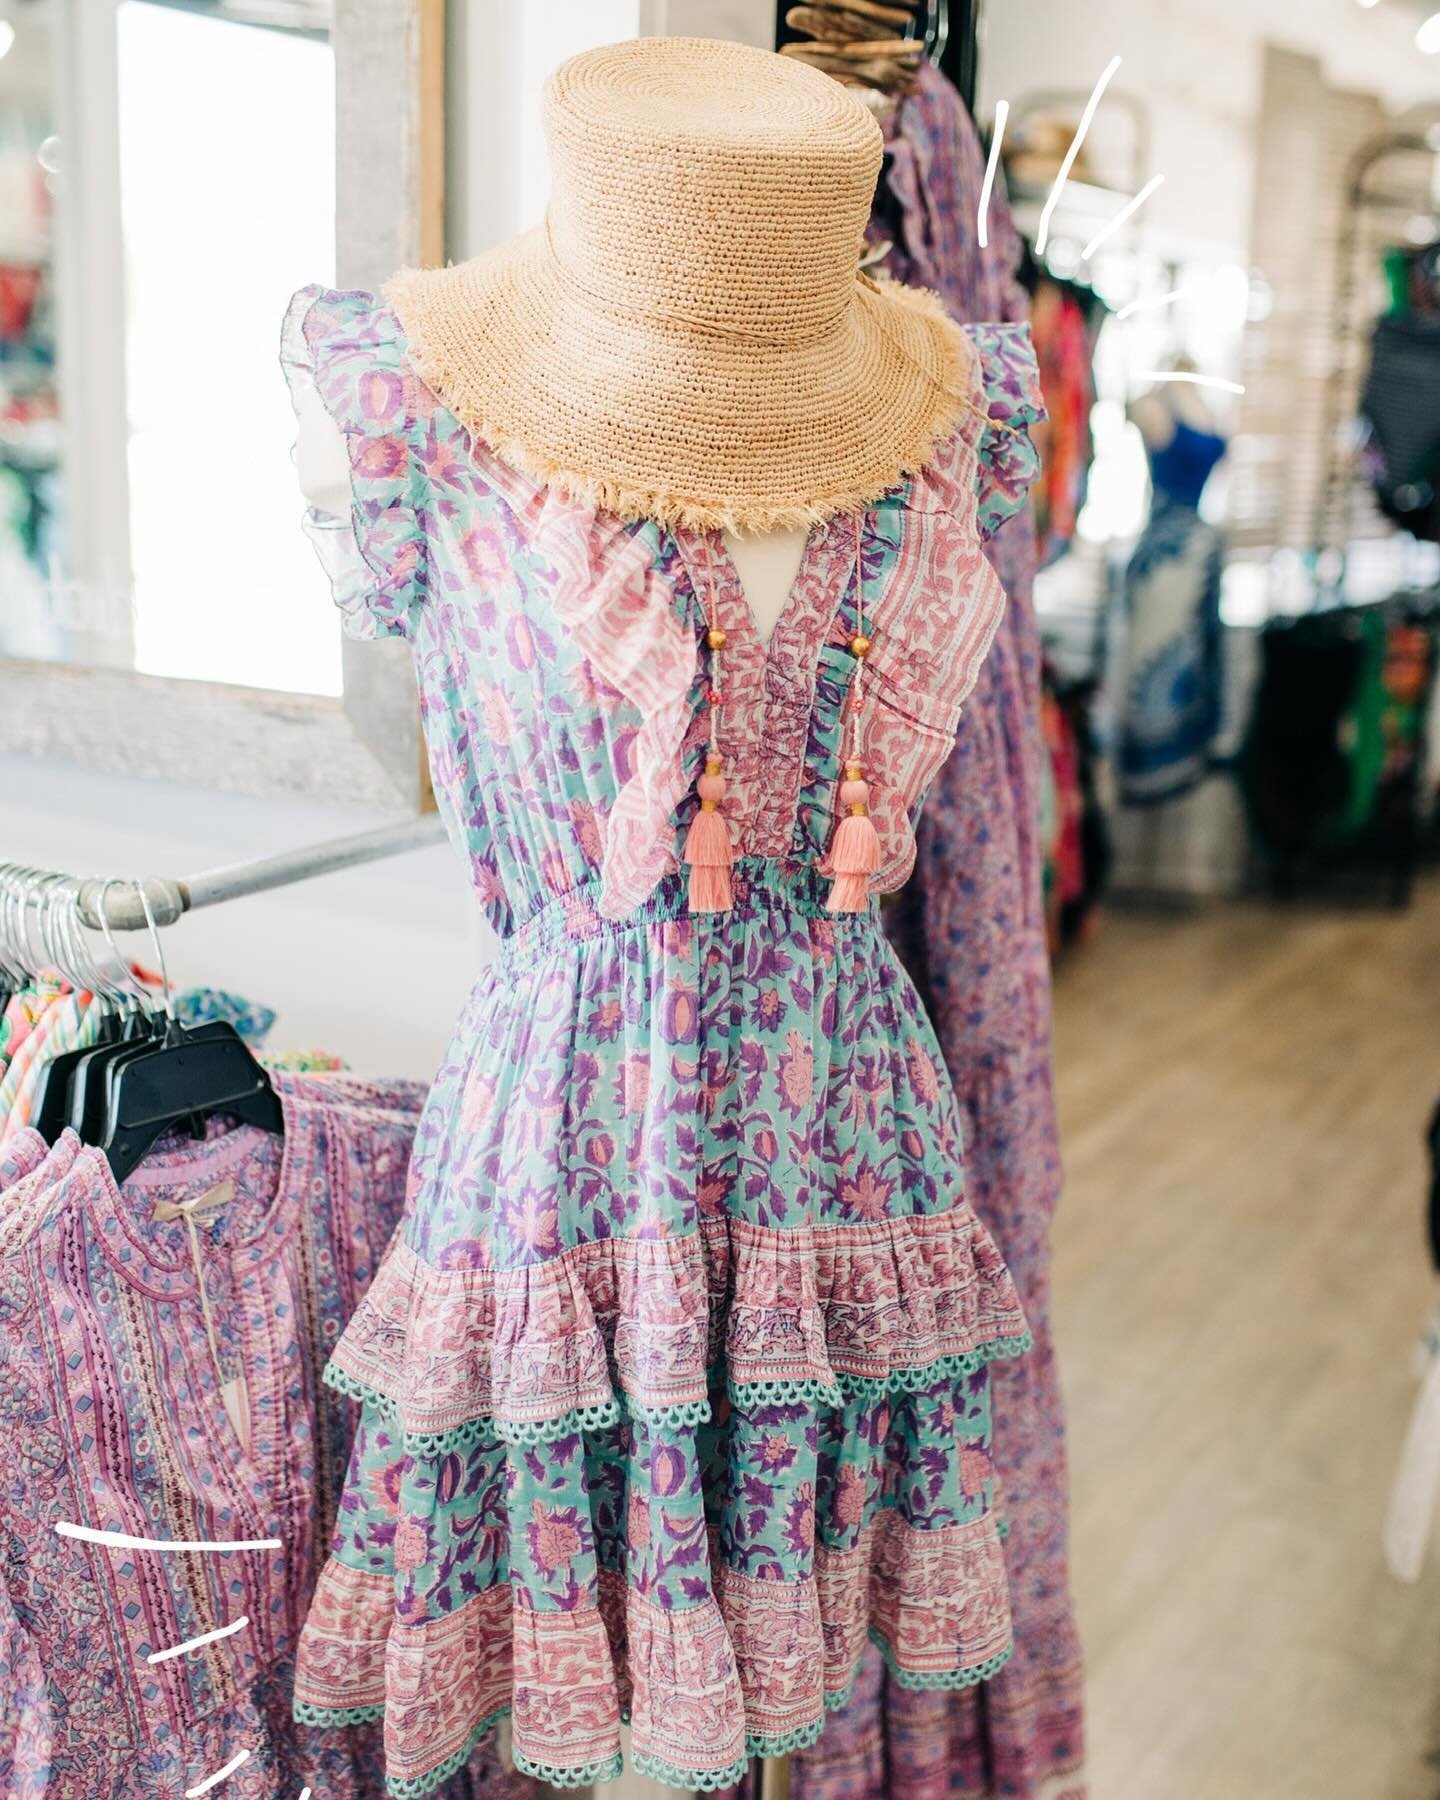 The racks are full of so many goodies for your upcoming vacation or &hellip; if you&rsquo;re like me &amp; ready to start getting your summer wardrobe in check ☀️✔️😍👙⛱️

&bull; Thursday - Tuesday 10-4 &bull;
#bodydoublefenwick #fenwickisland #ocmd 